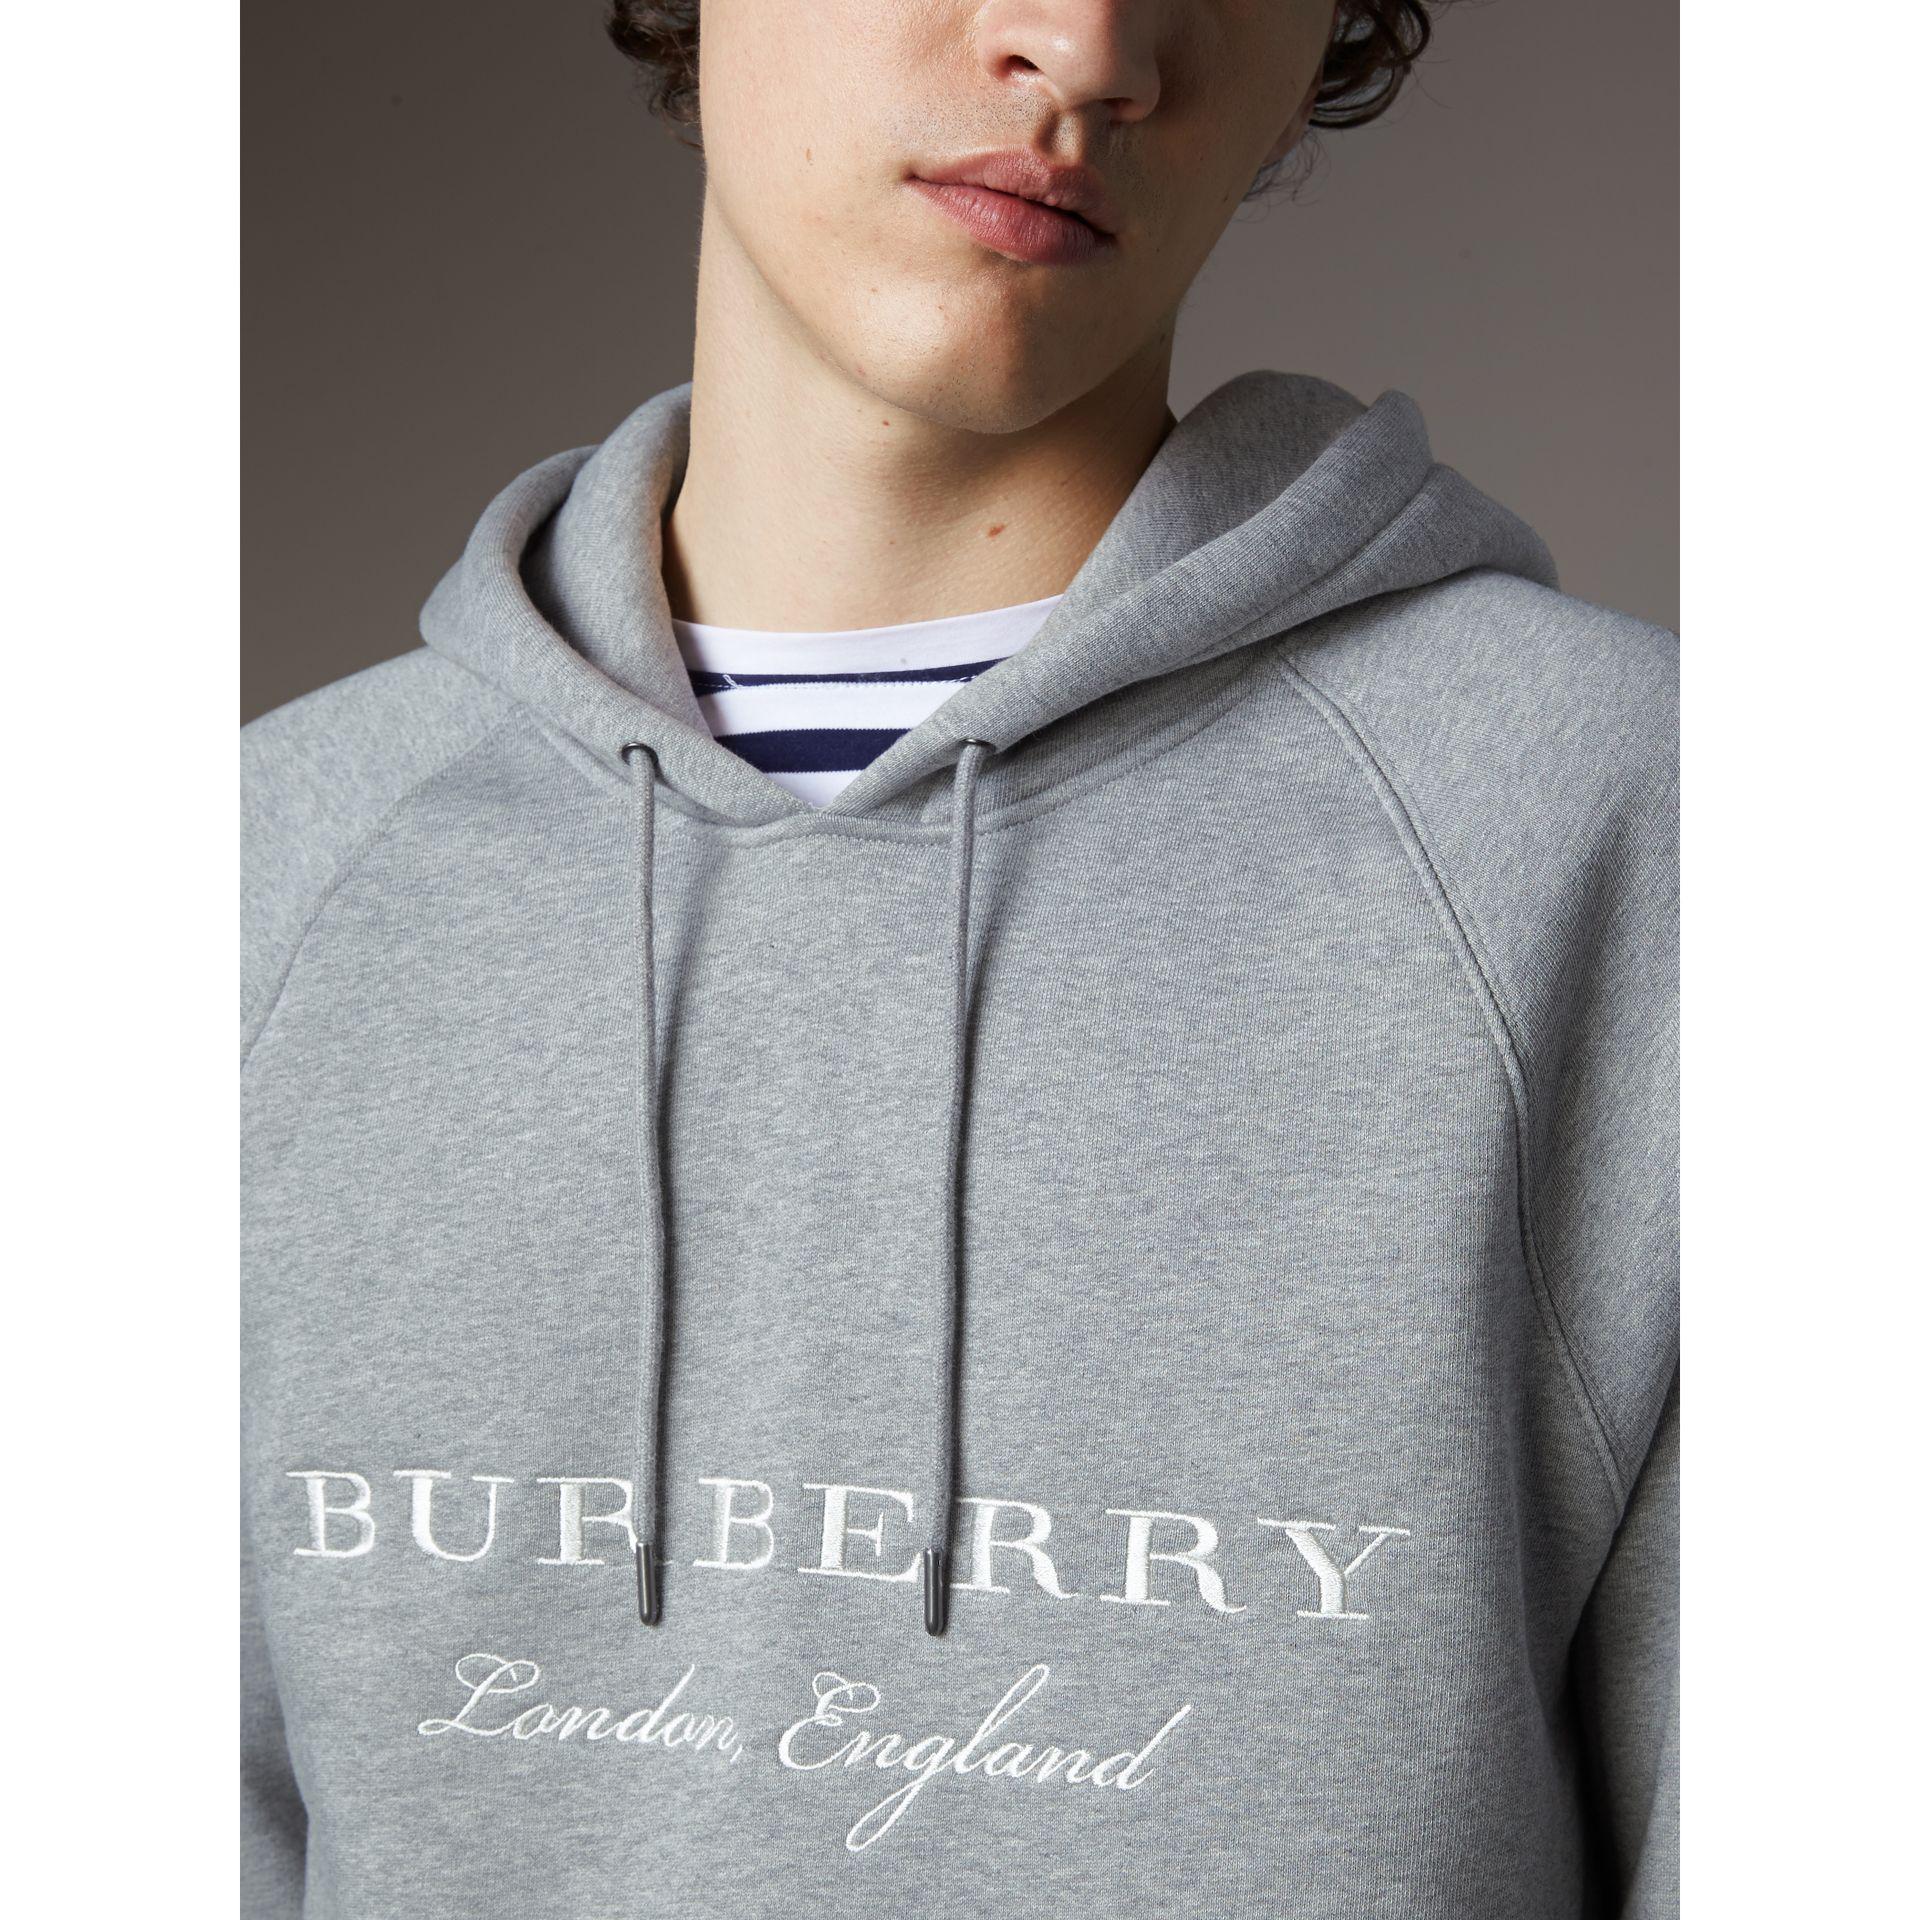 Burberry Embroidered Hooded Sweatshirt Grey Melange in Gray for